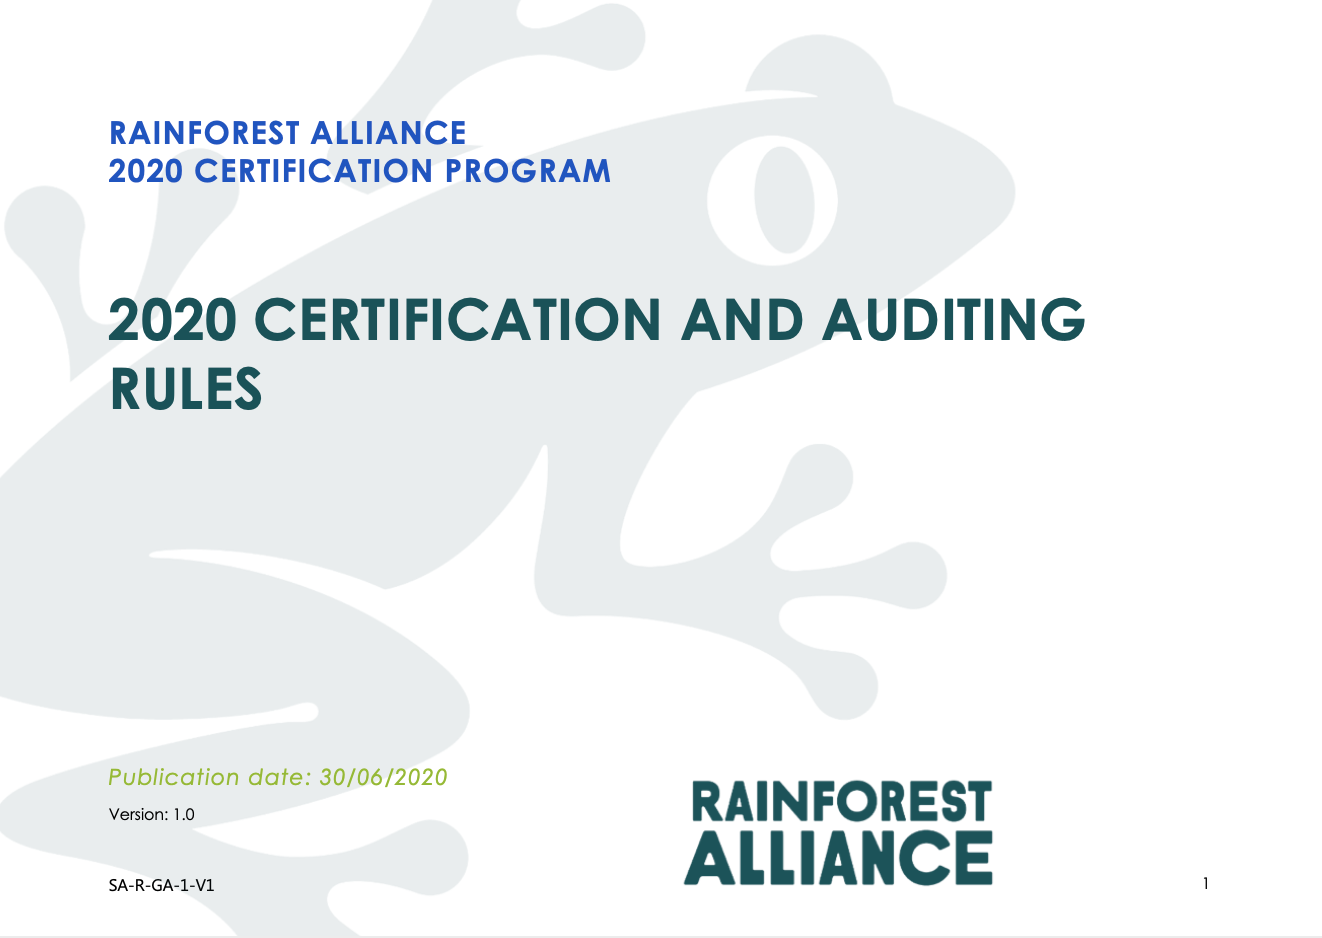 2020 Certification and Auditing Rules